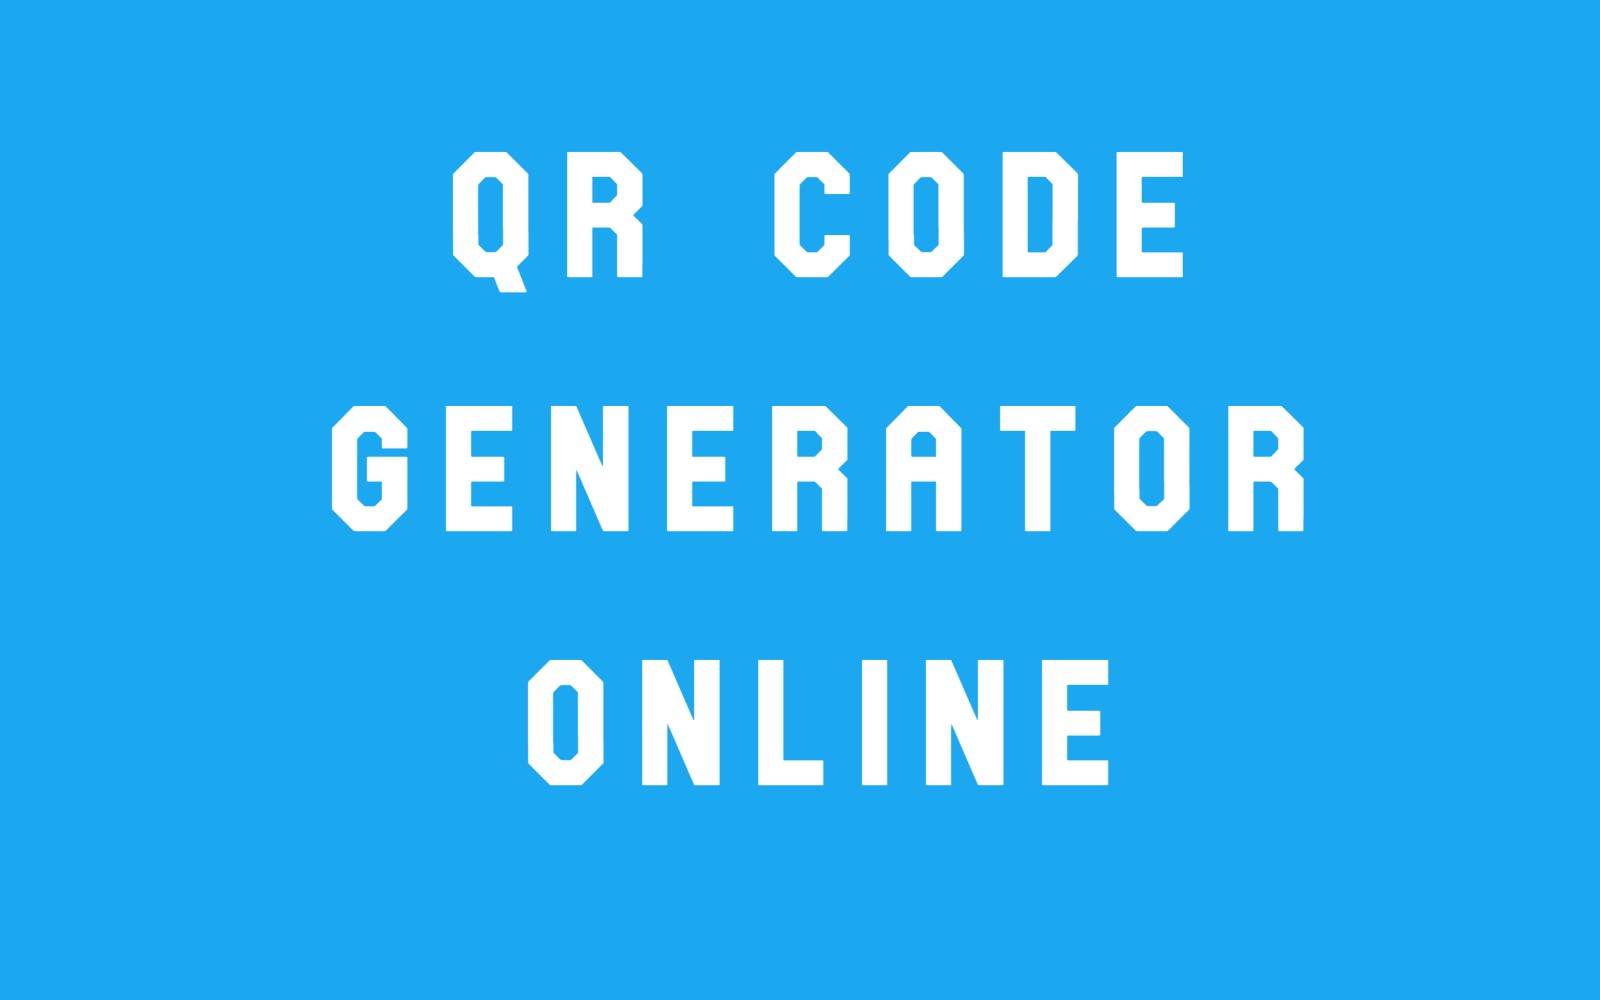 Add QRcode generator script to your blogger. you can add a QR code generator to your blogger on a widget or as a post by creating a new post and scrolling HTML view, copying the code below, and pasting it to your widget Html.